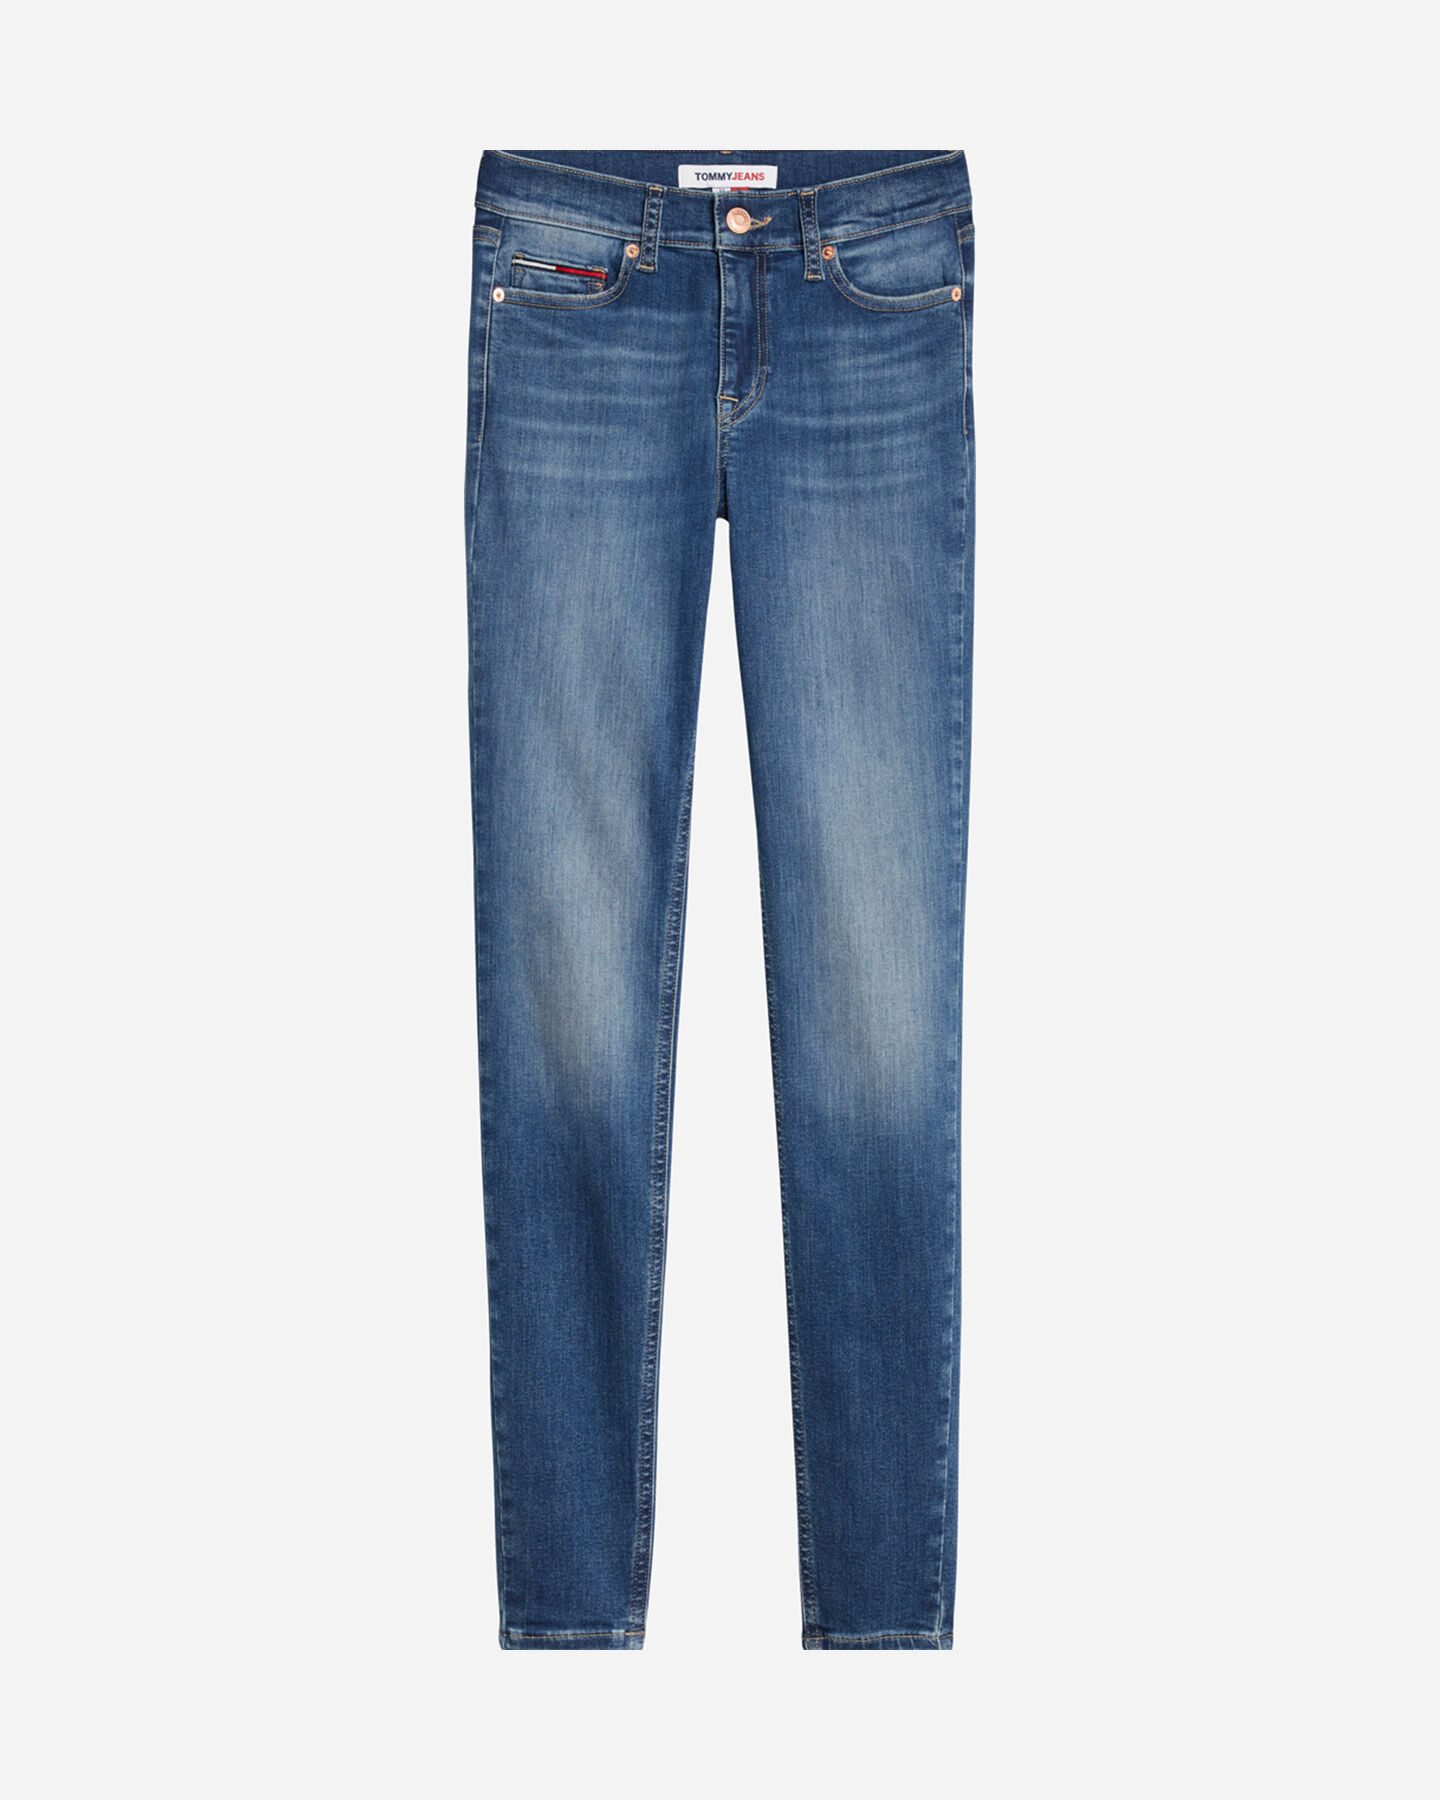  Jeans TOMMY HILFIGER NORA SKINNY MR L30 W S4098809|1A5|26 scatto 0